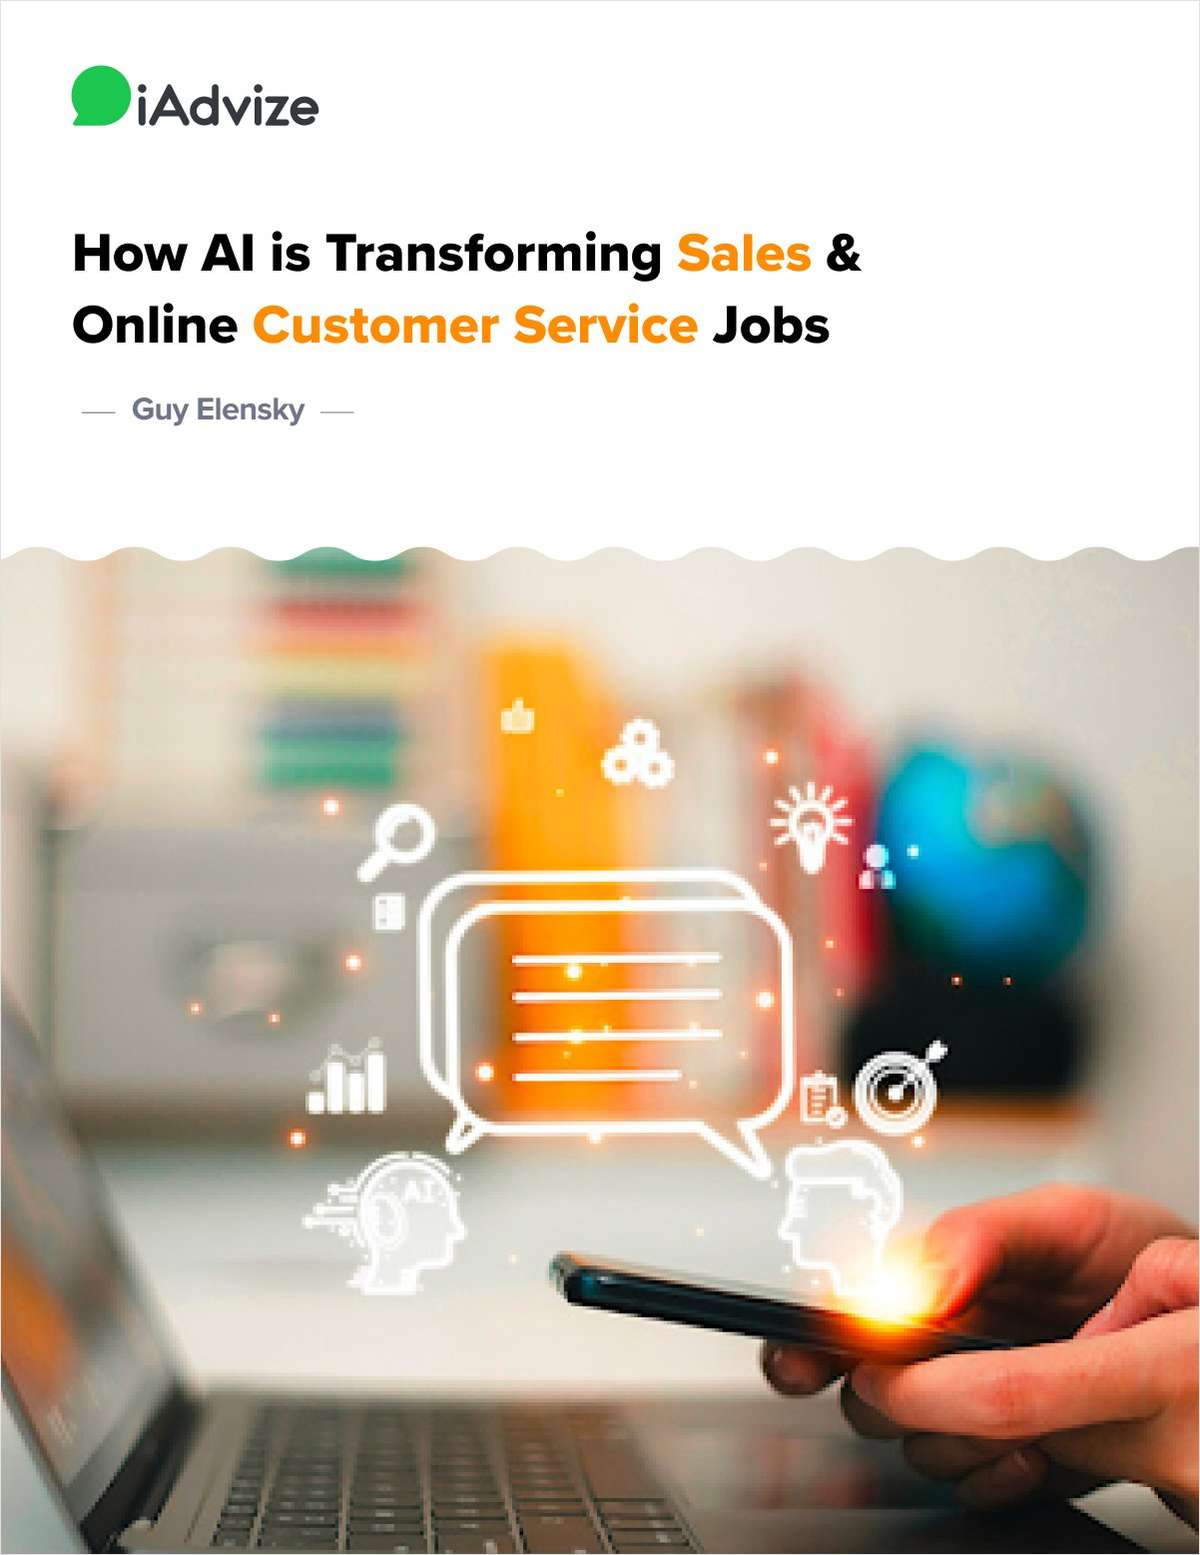 How AI is Transforming Sales & Online Customer Service Jobs